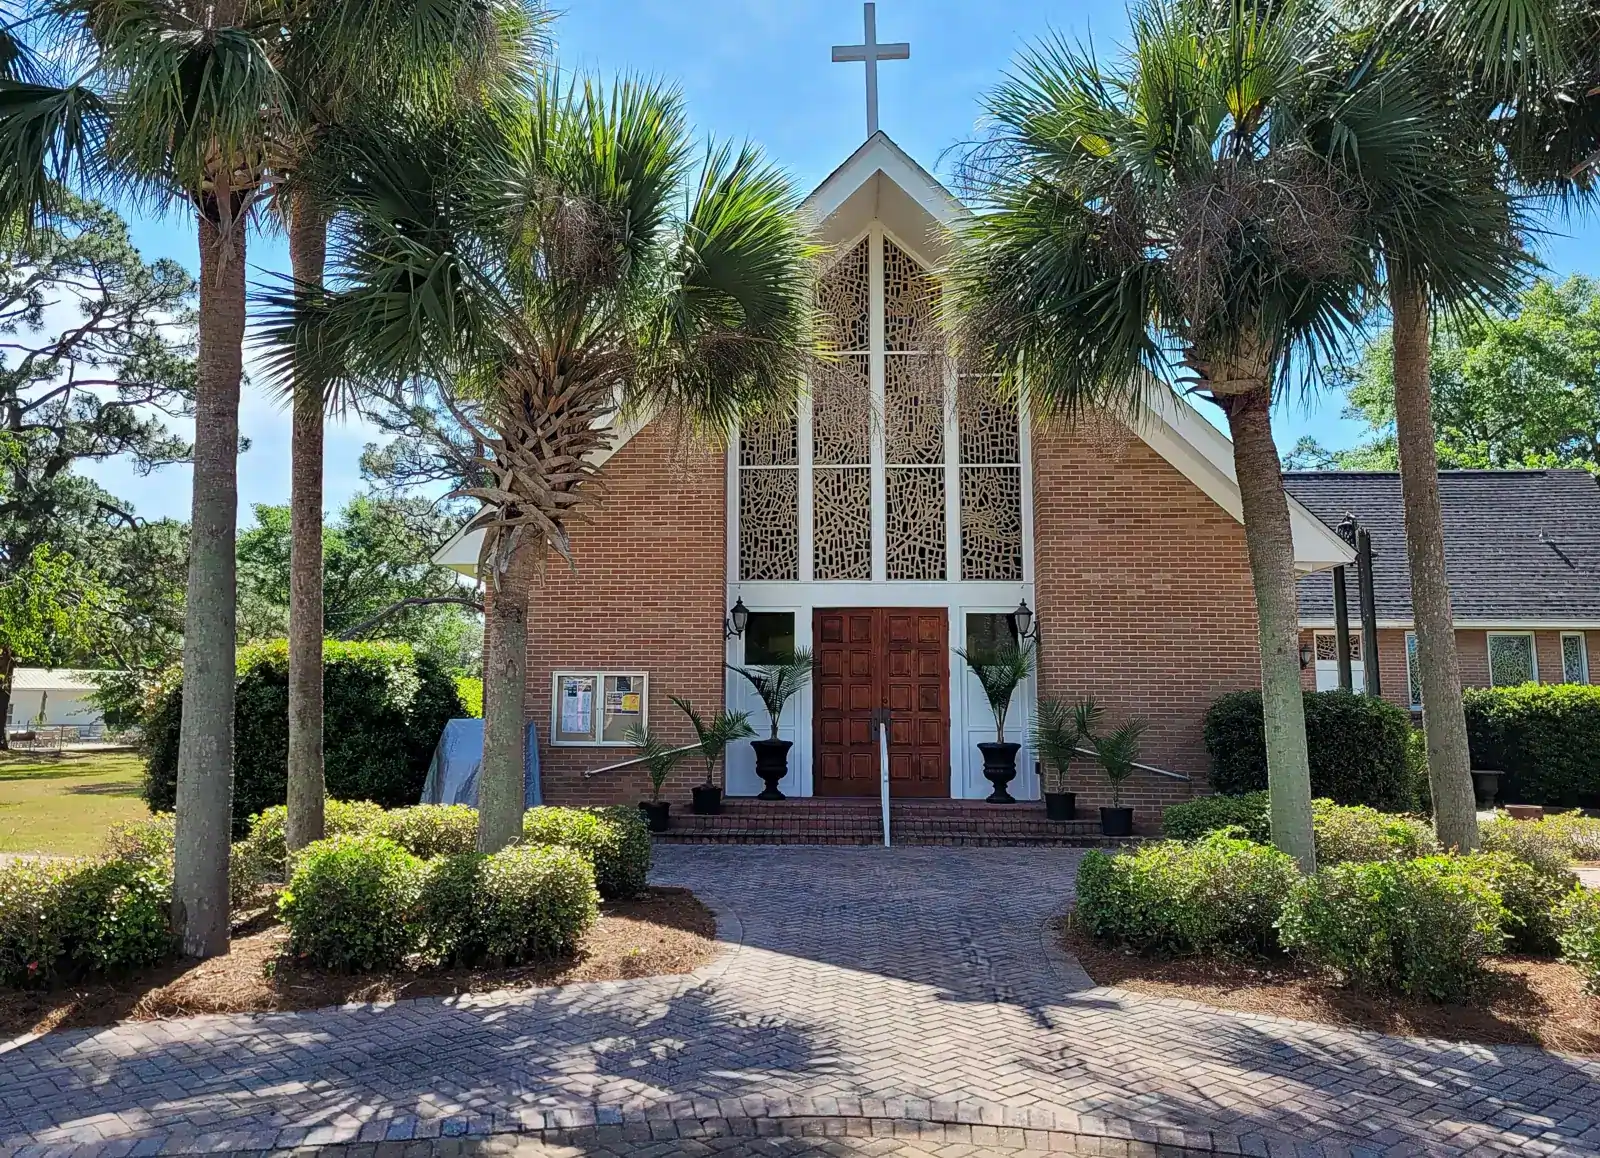 A front view of St. Joseph Catholic Church